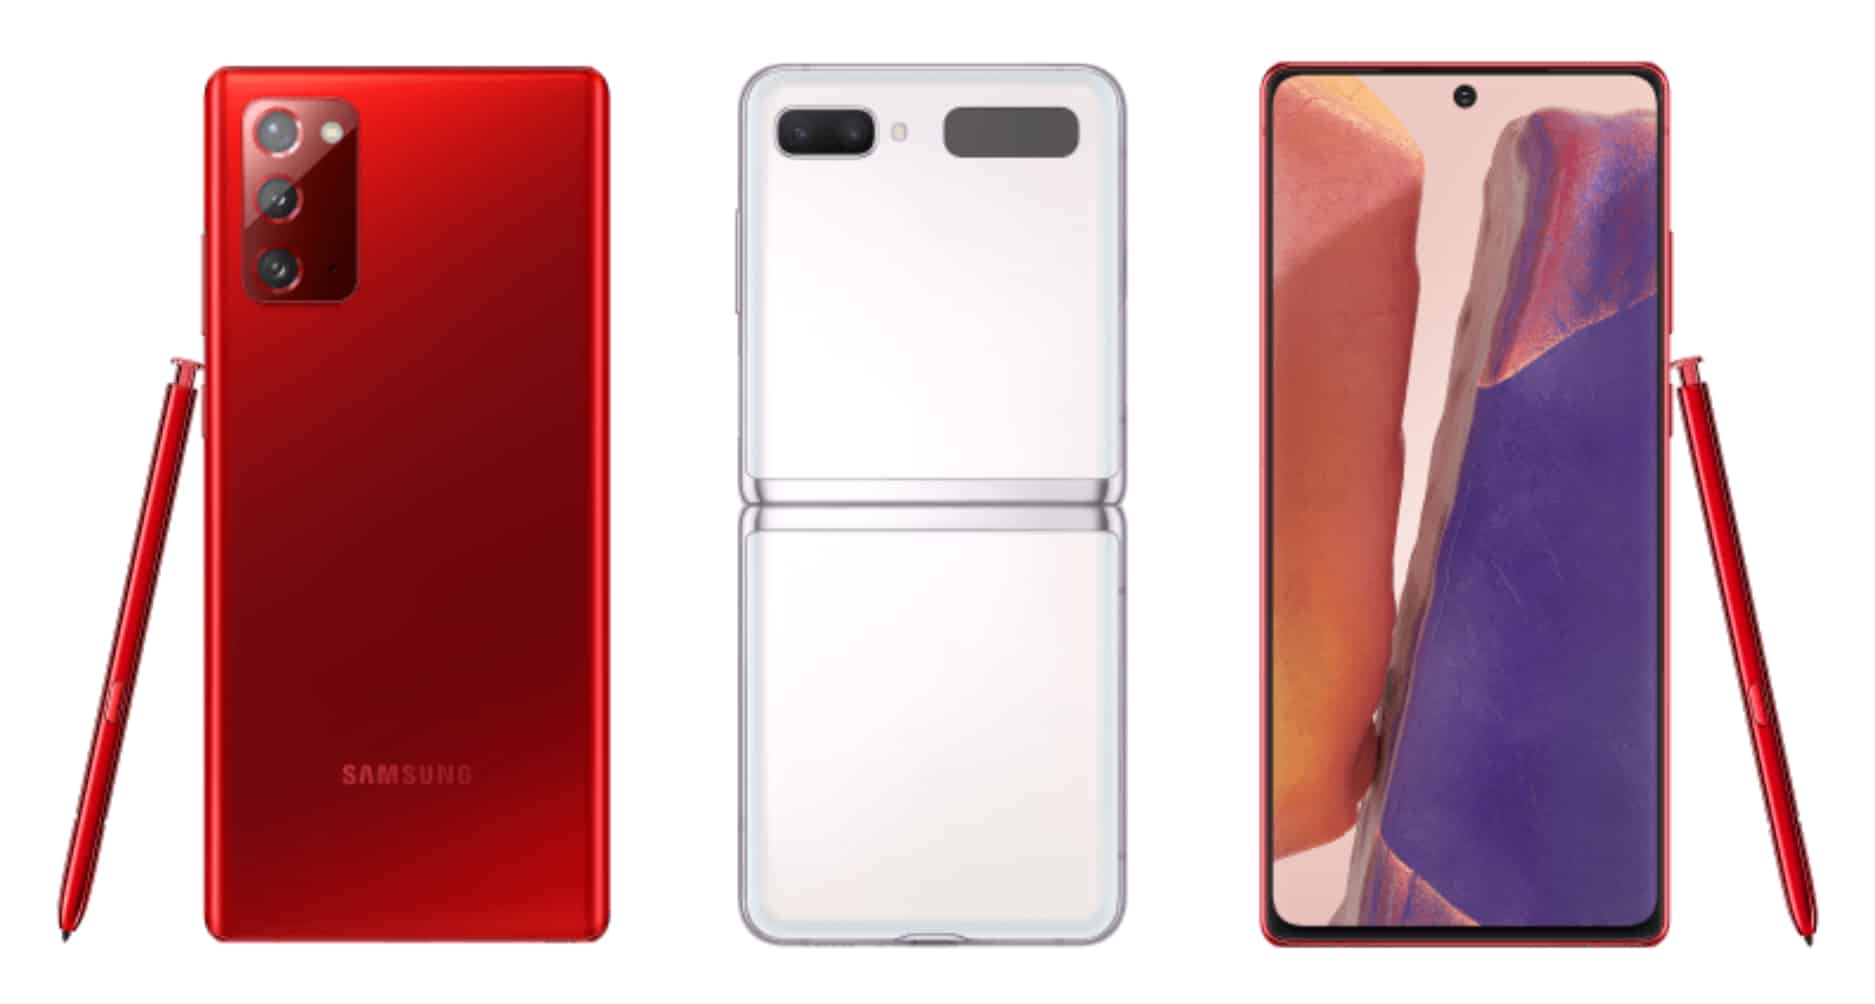 Samsung Now Brings Galaxy Z Flip 5G in 'Mystic White' and Galaxy Note 20 in 'Mystic Red'